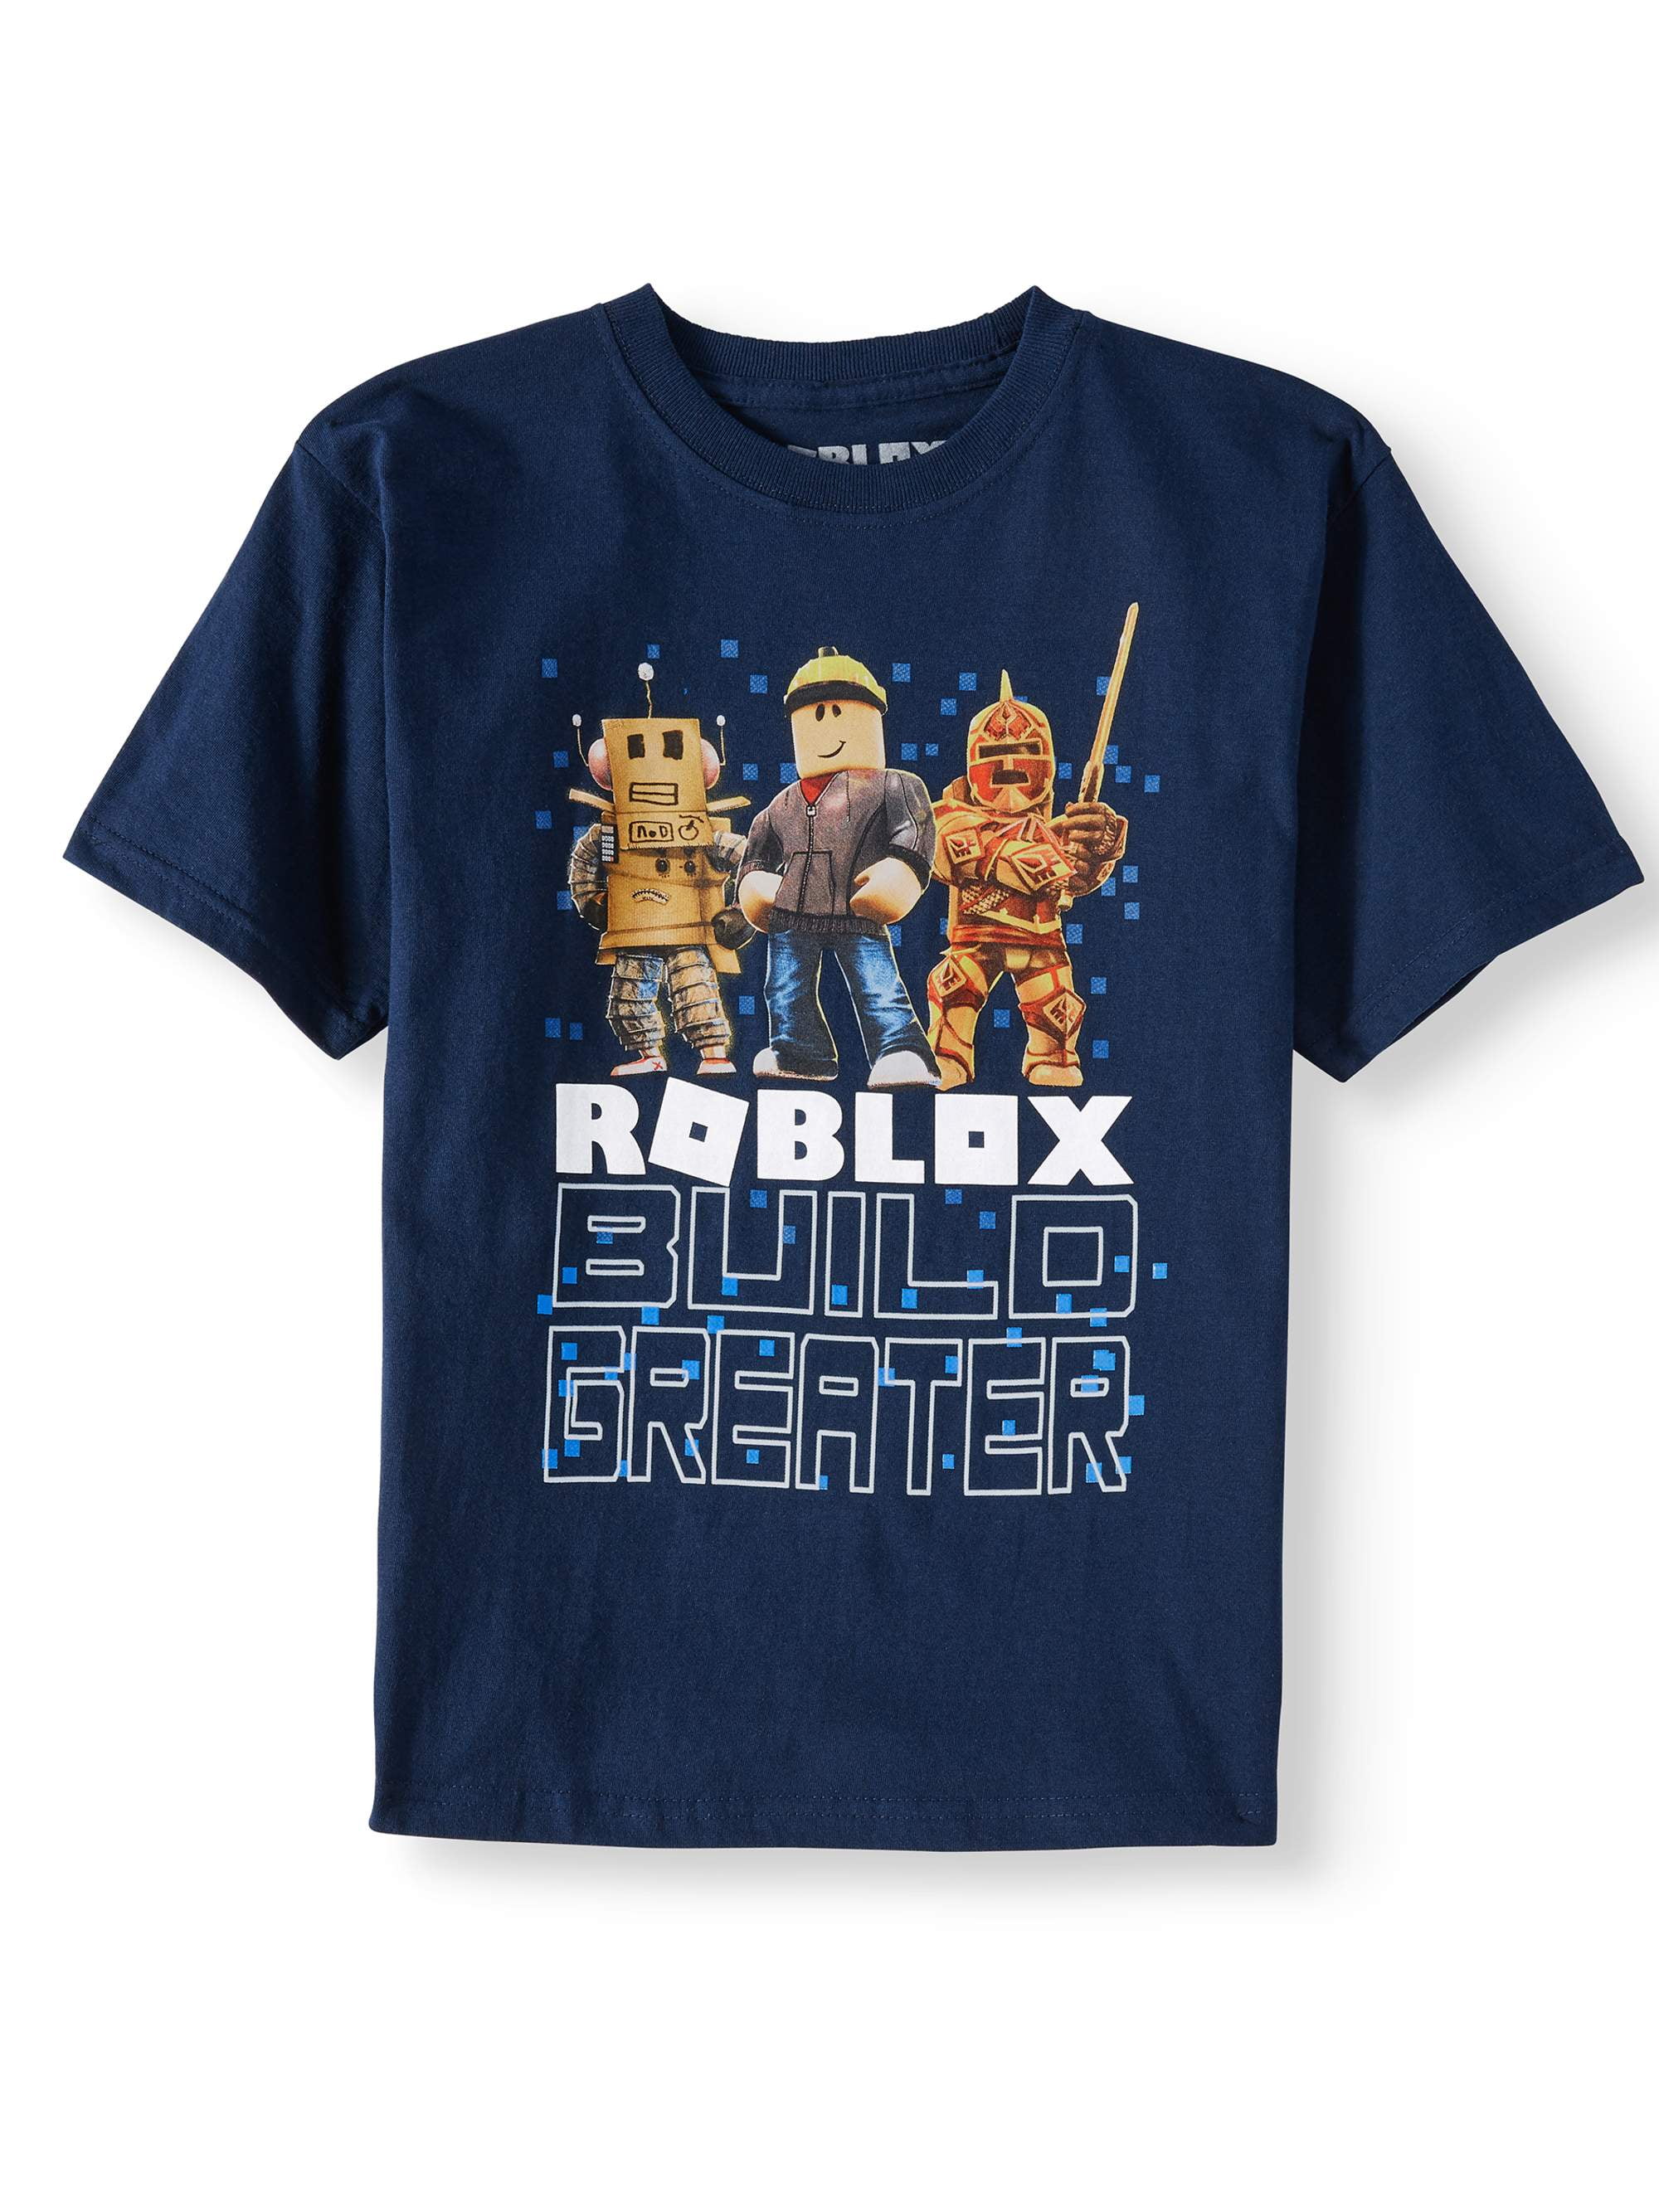 How To Make Your Own Clothes On Roblox And Sell Them